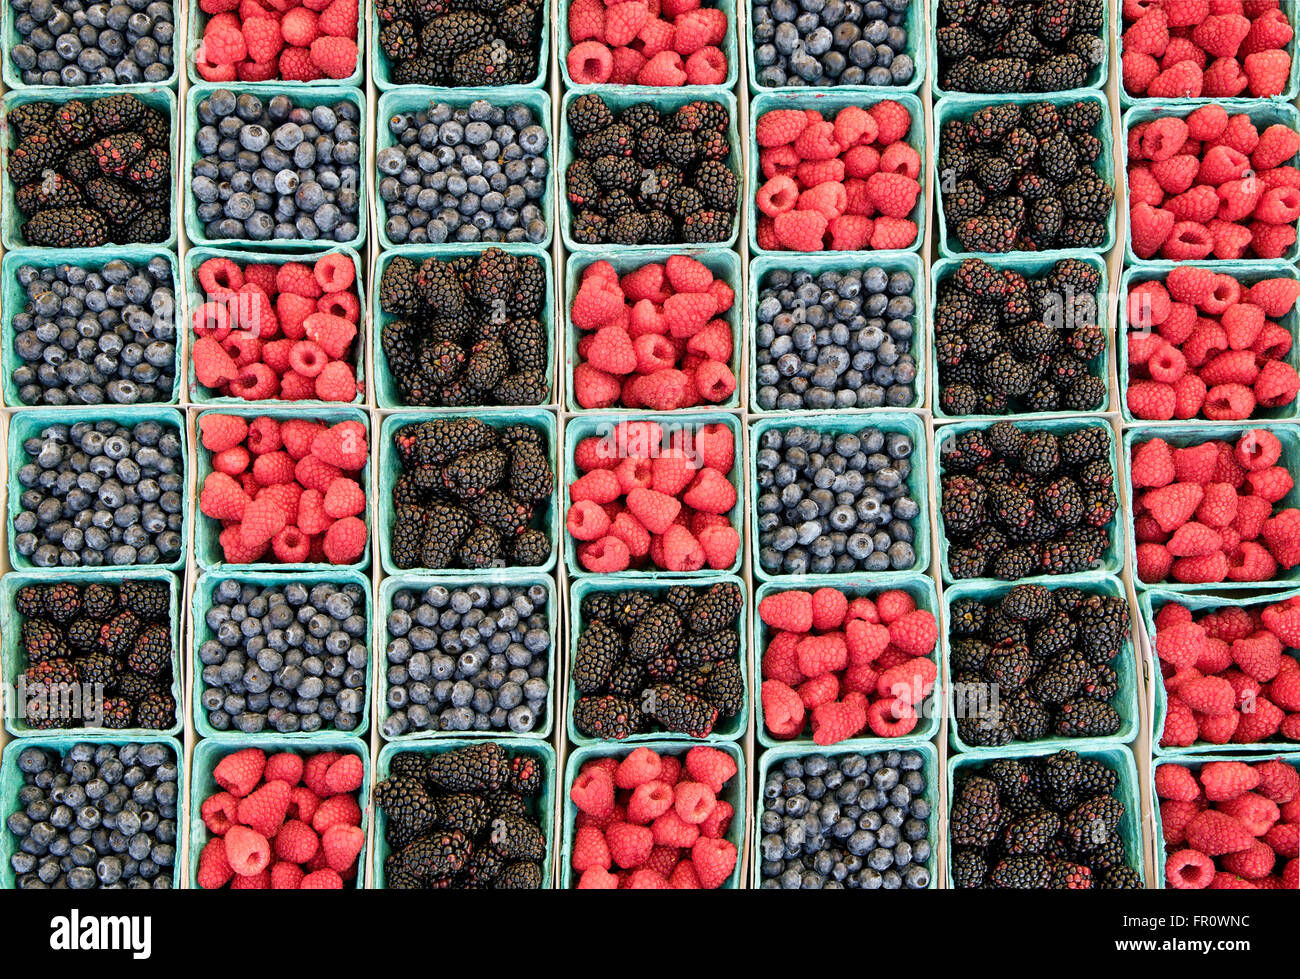 Blueberries, boysenberries and raspberries at a farmers market. Los Angeles, California Stock Photo